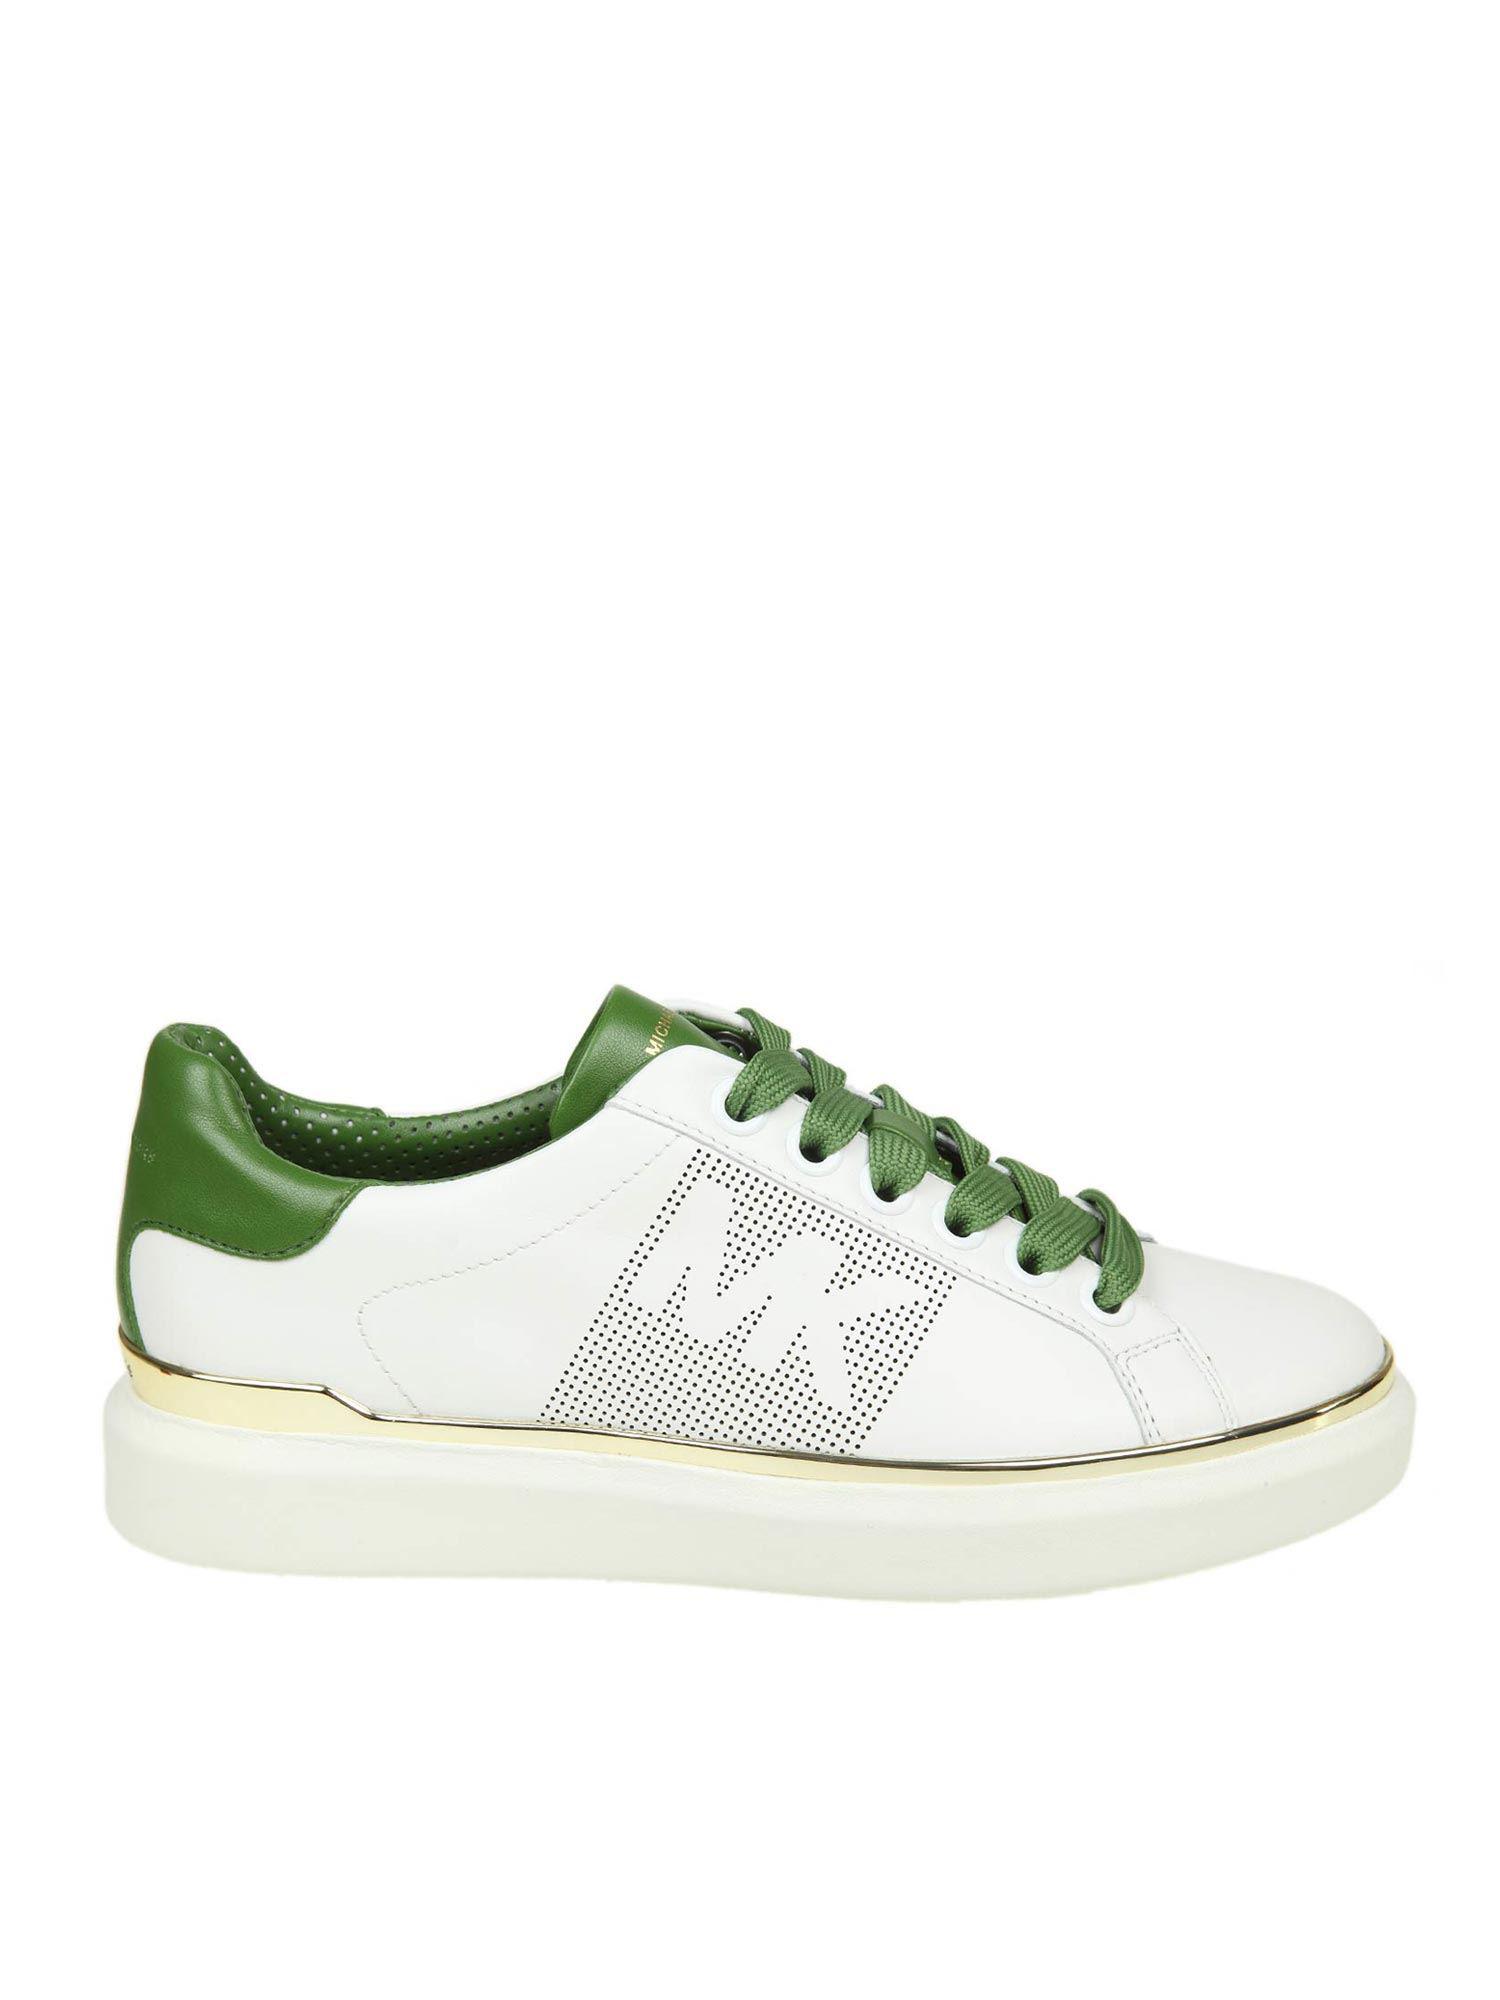 Michael Kors Leather Max Lace Up White And Green Sneakers - Lyst